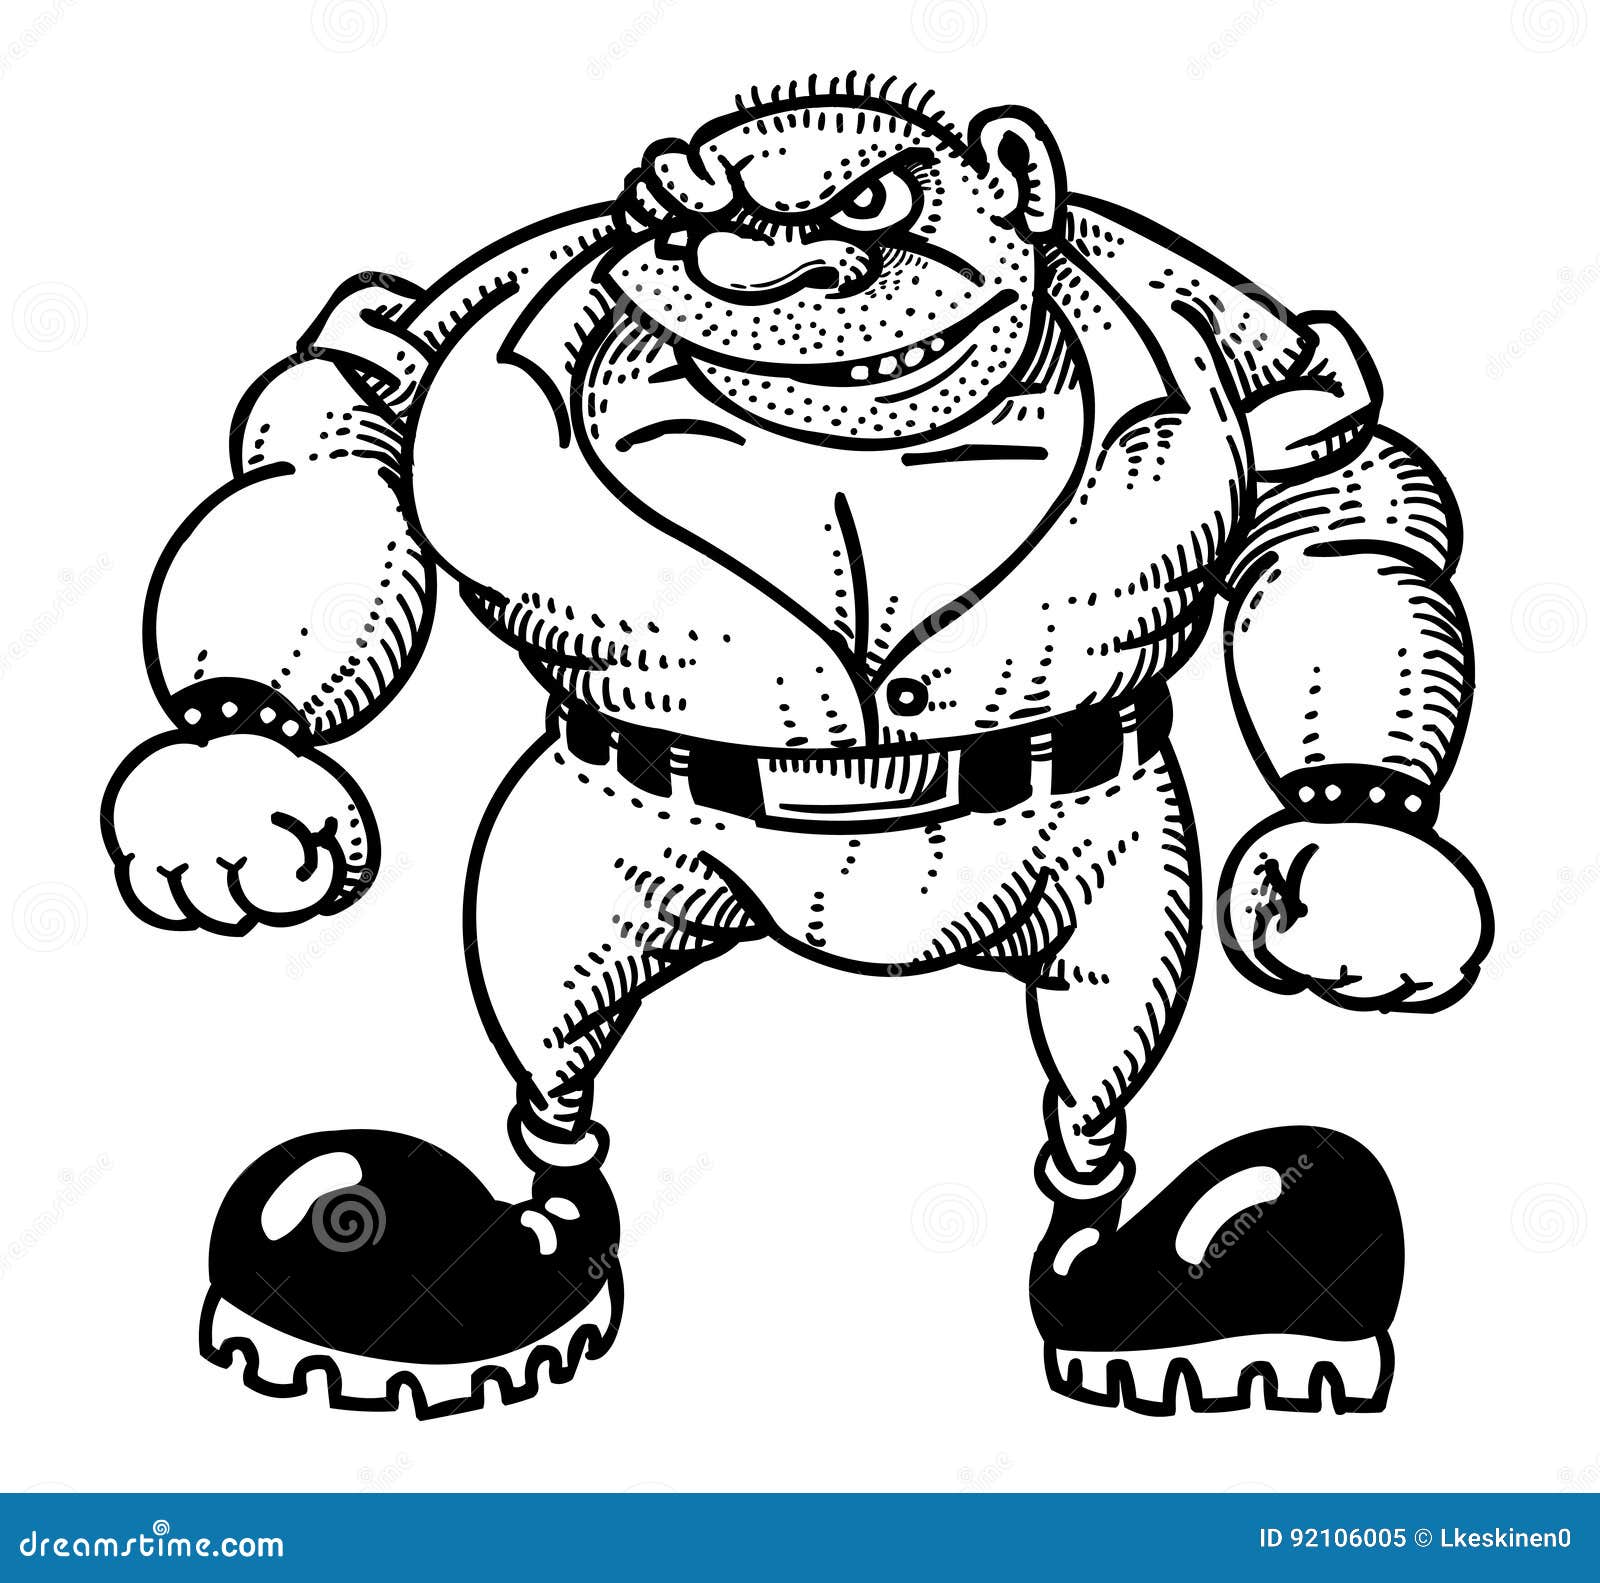 Cartoon image of tough man stock vector. Illustration of freehand